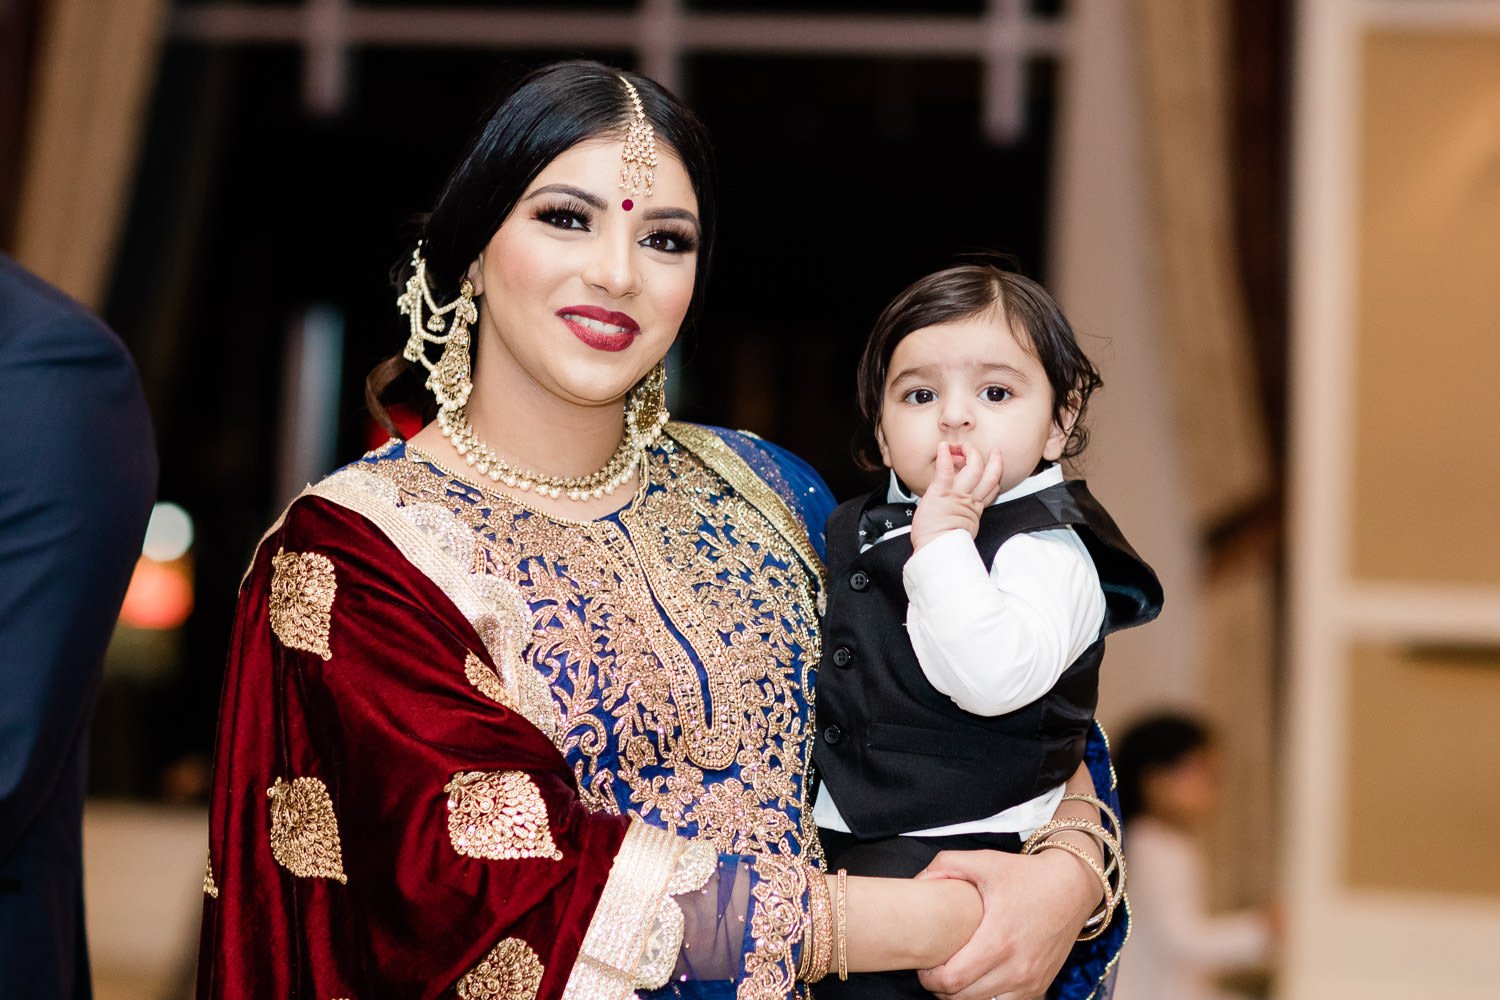 Indian bride holding a baby at the first Lohri